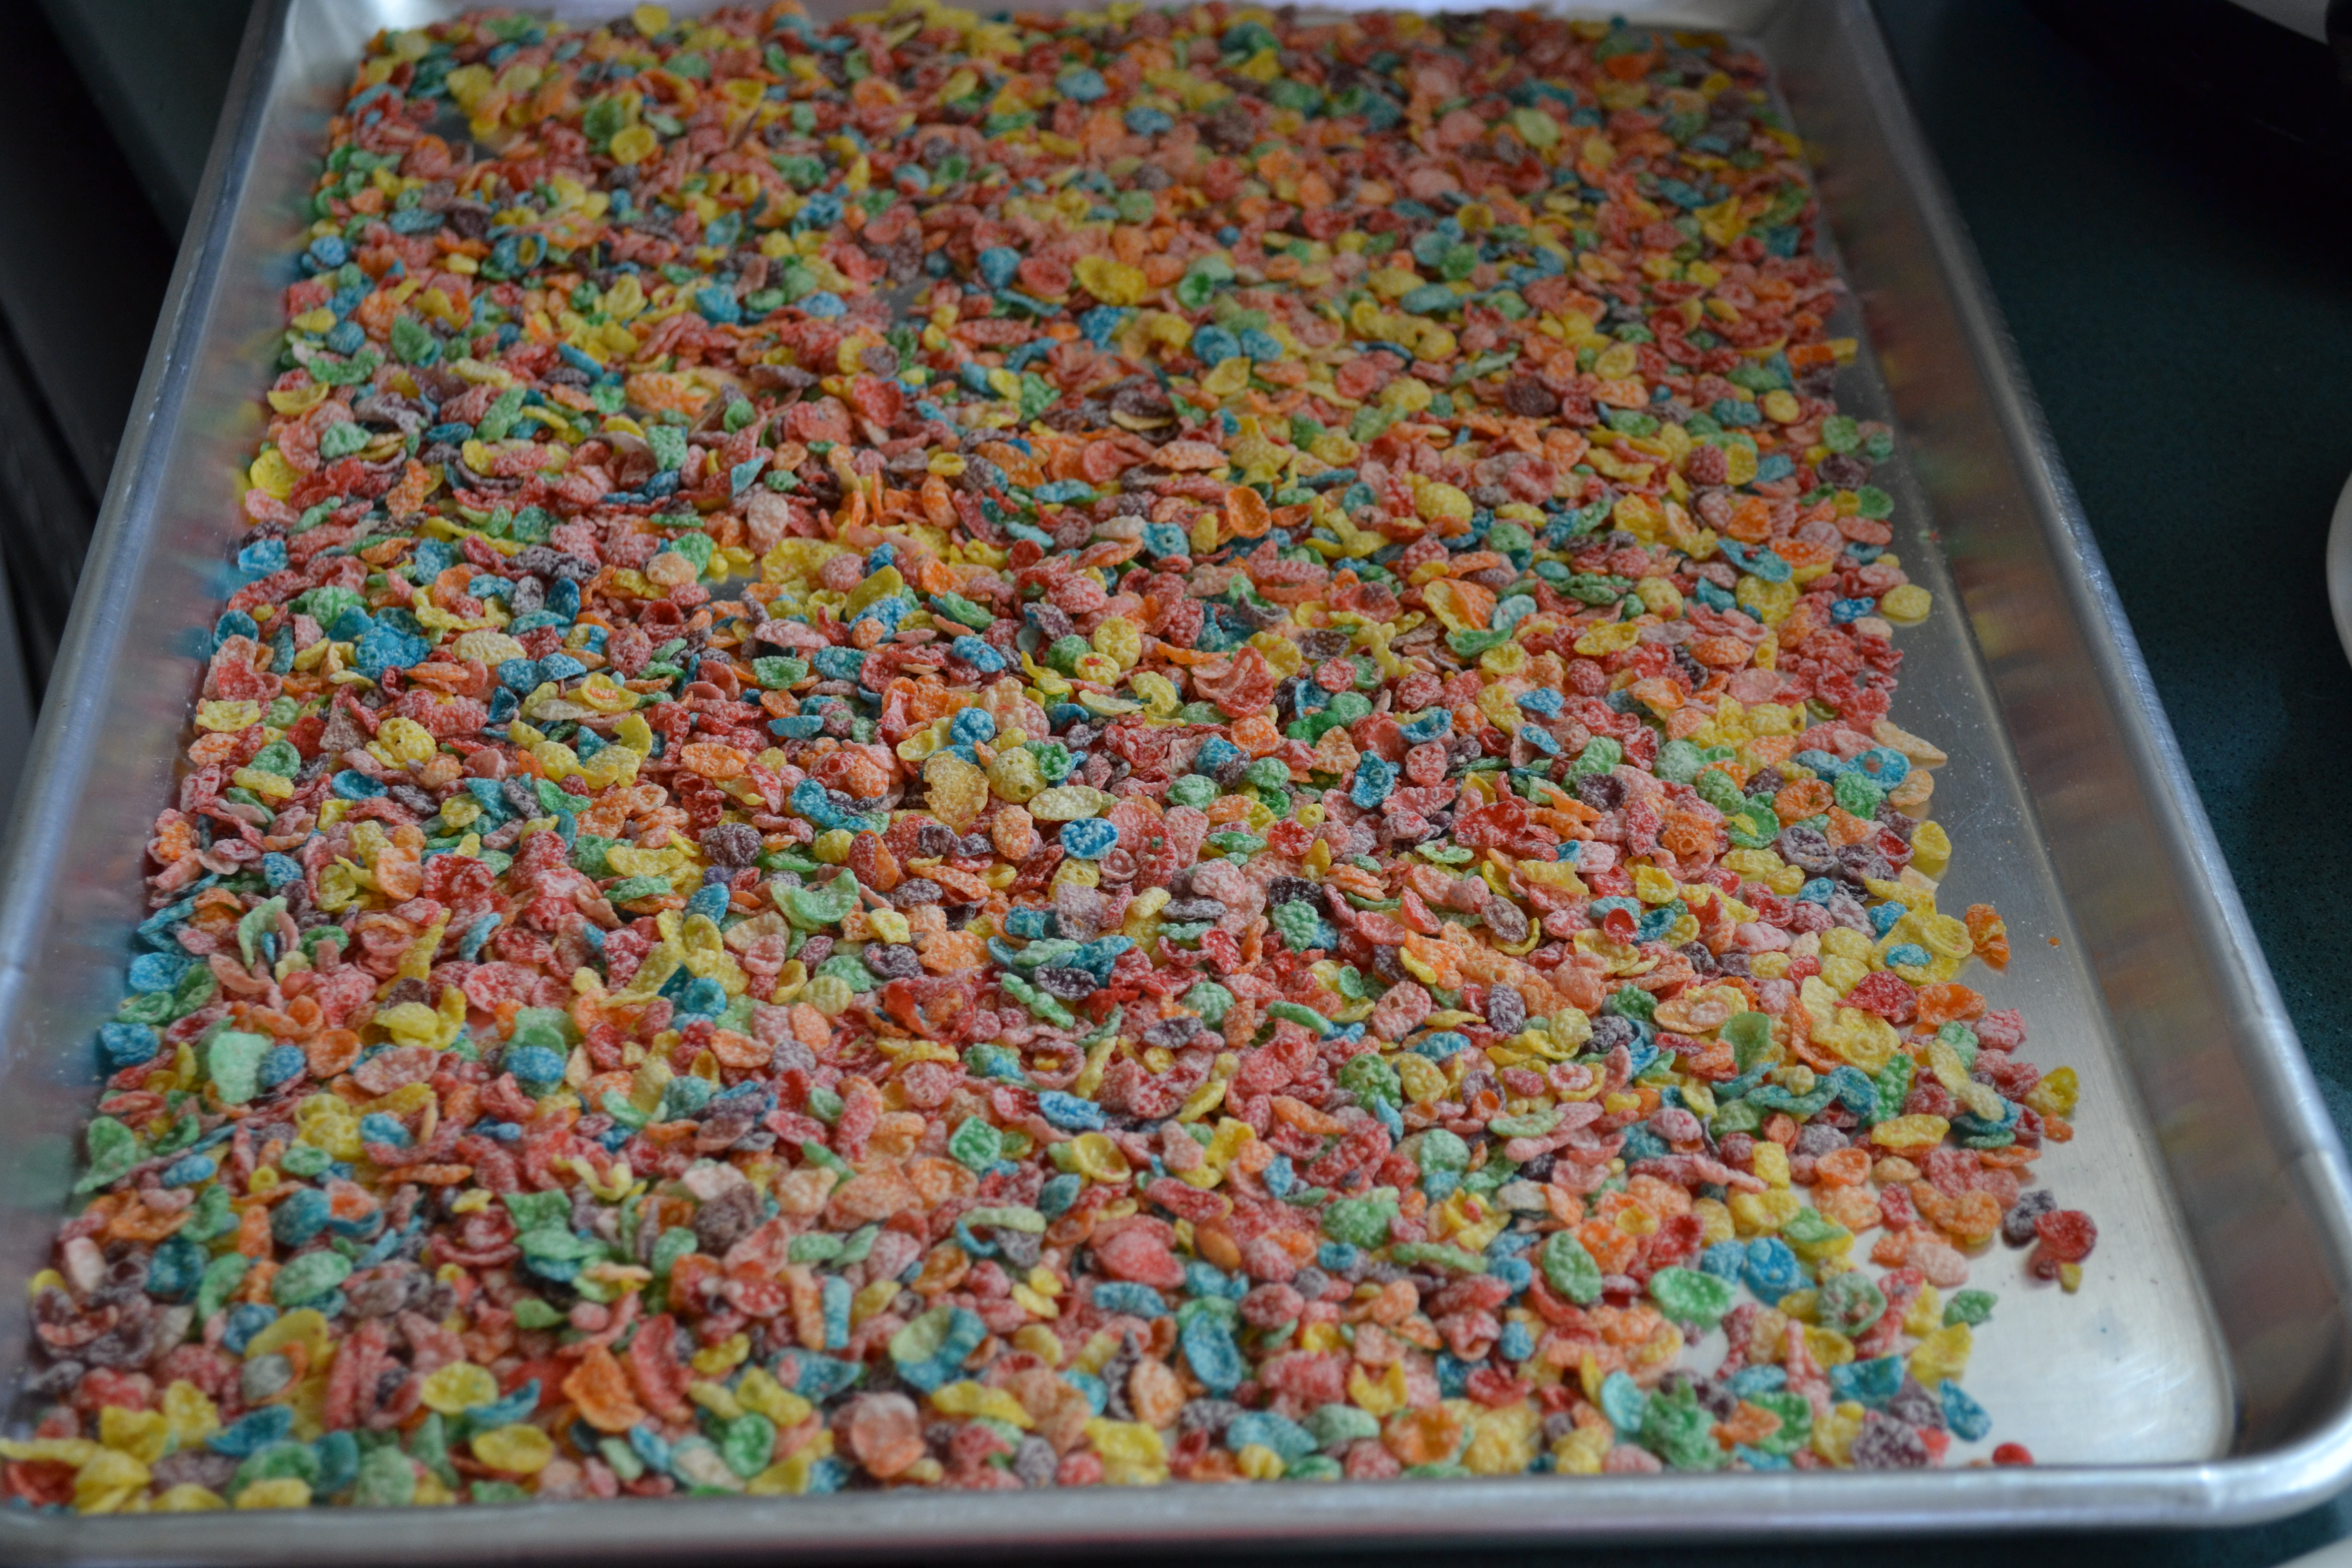 Cereal on a cookie sheet